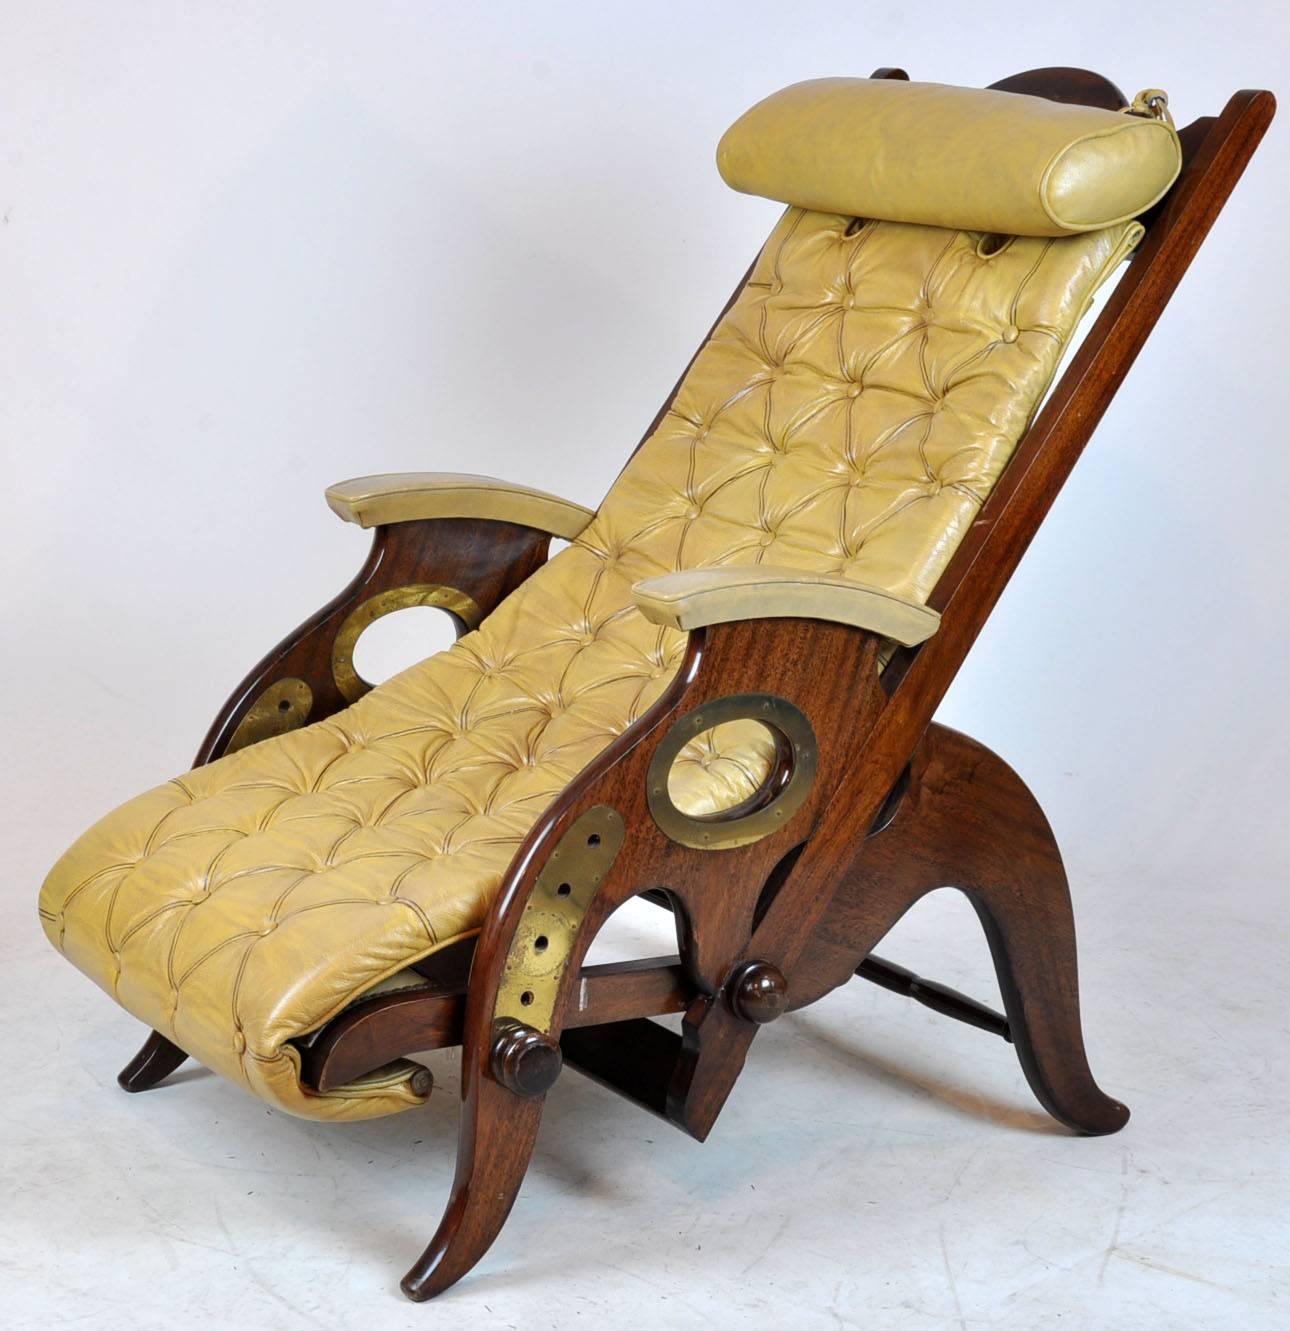 Adjustable brass and wood yacht deck chair. Possibly designed by Jean-Pierre Hagnauer based on what I have found in researching the chair.